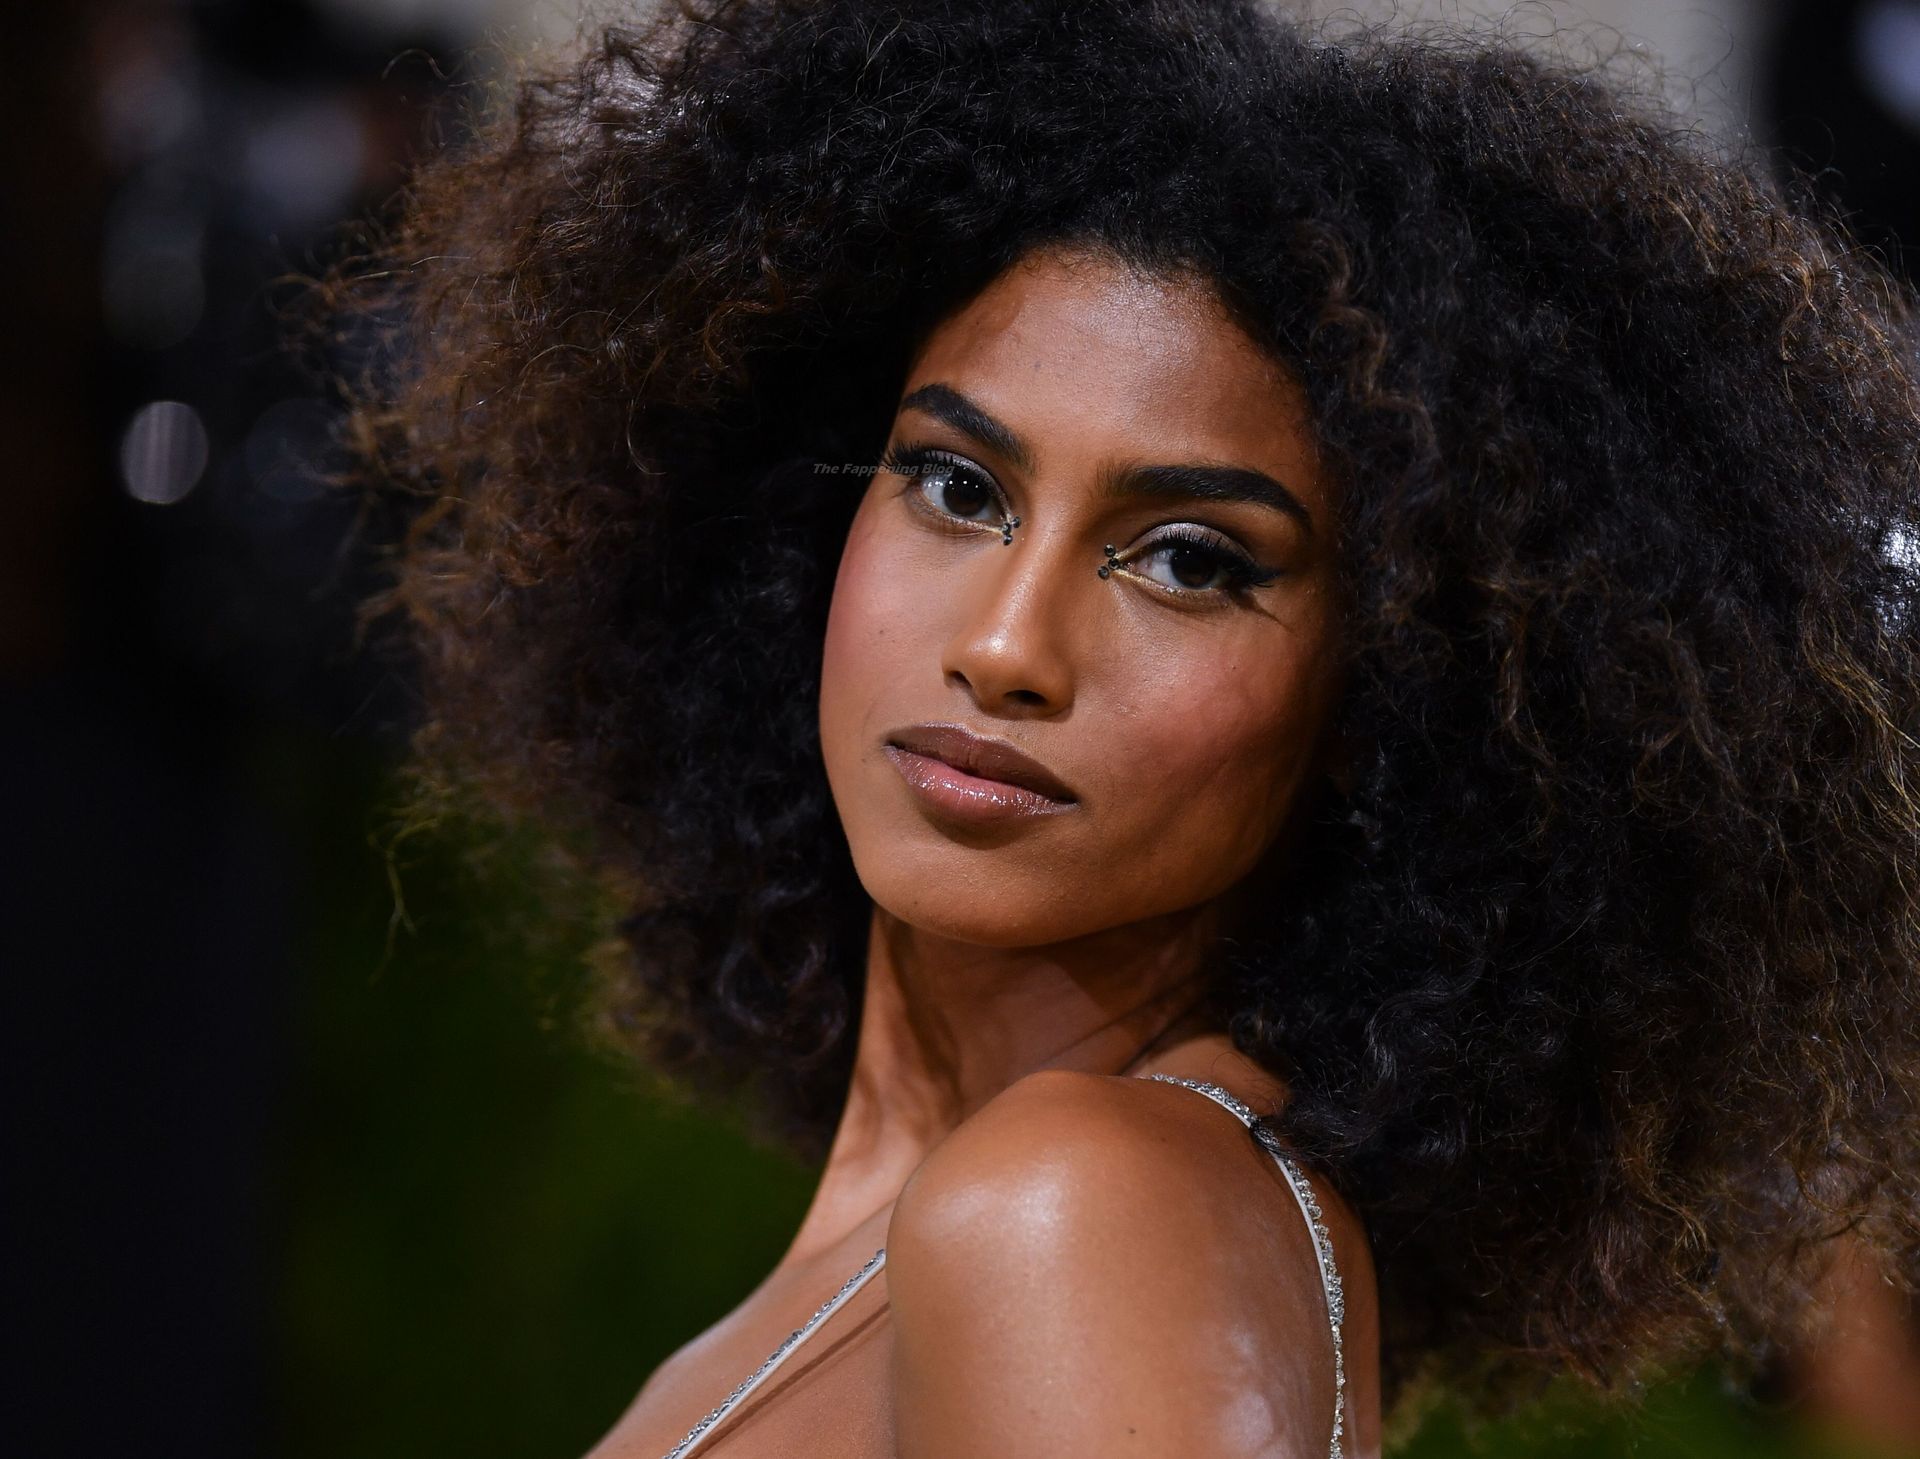 Imaan Hammam Poses in a See-Through Dress at the 2021 Met Gala in NYC (13 Photos) [Updated]